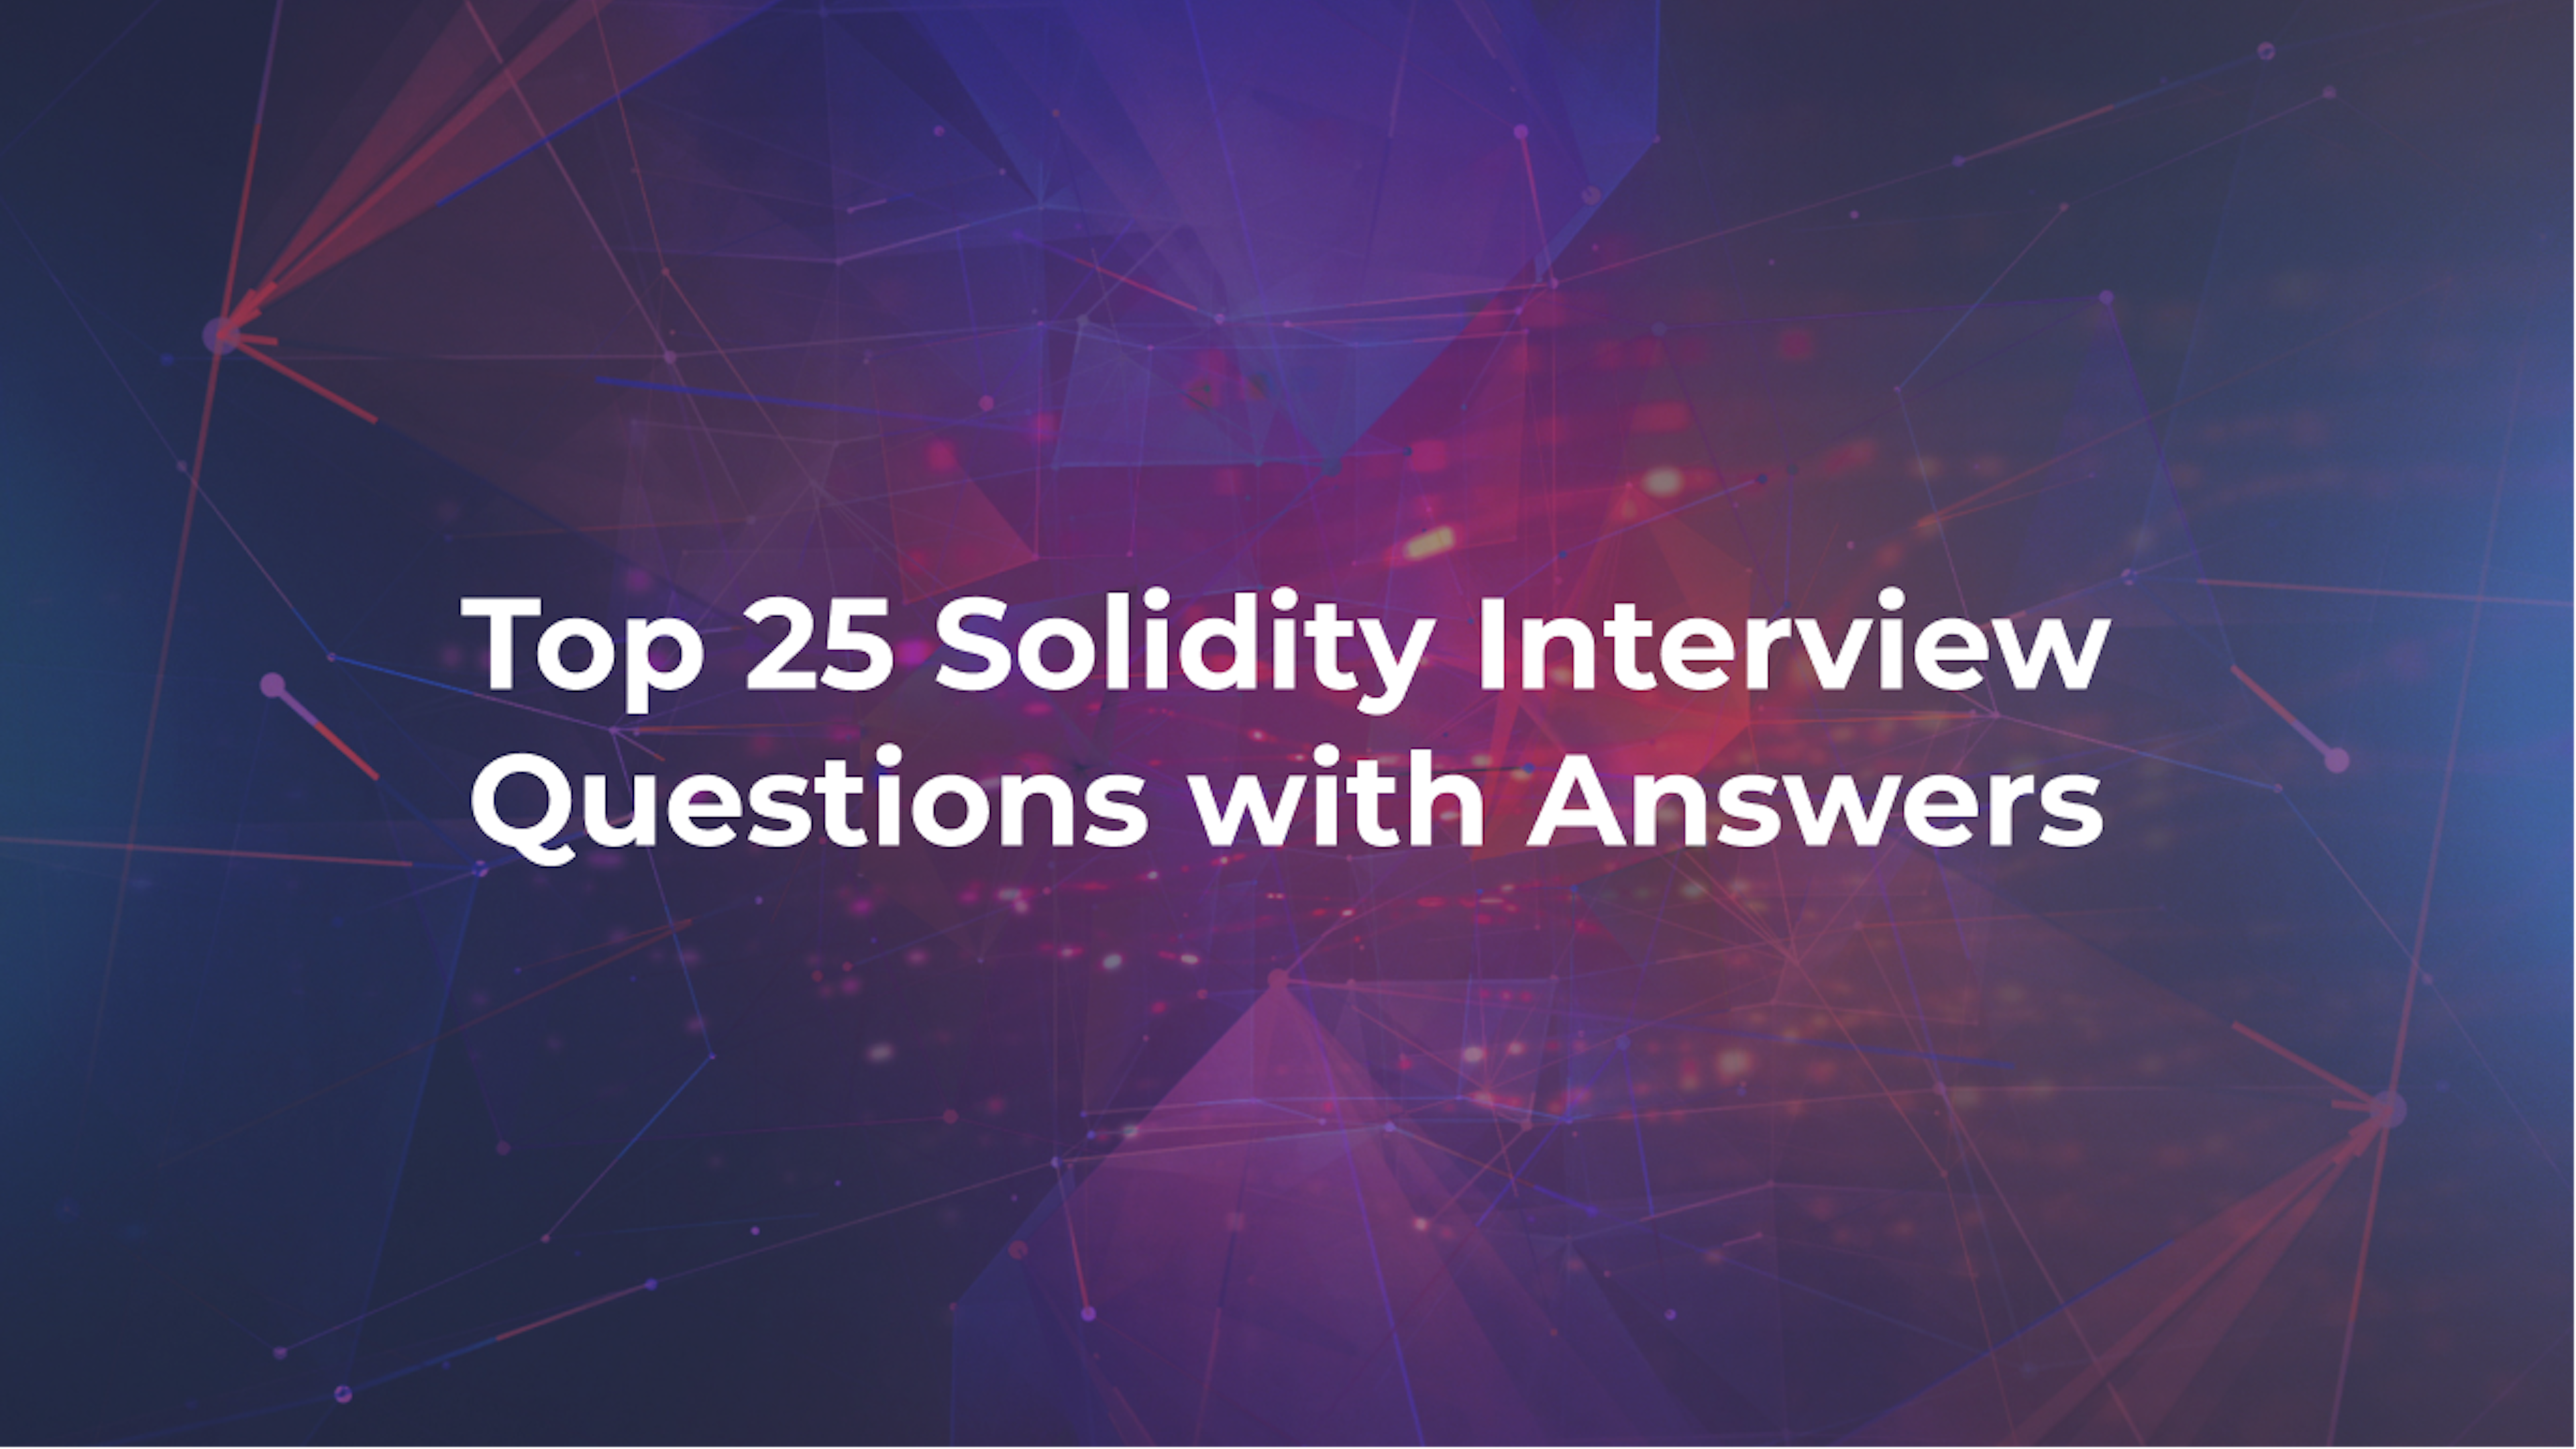 Top 25 Solidity Interview Questions with Answers